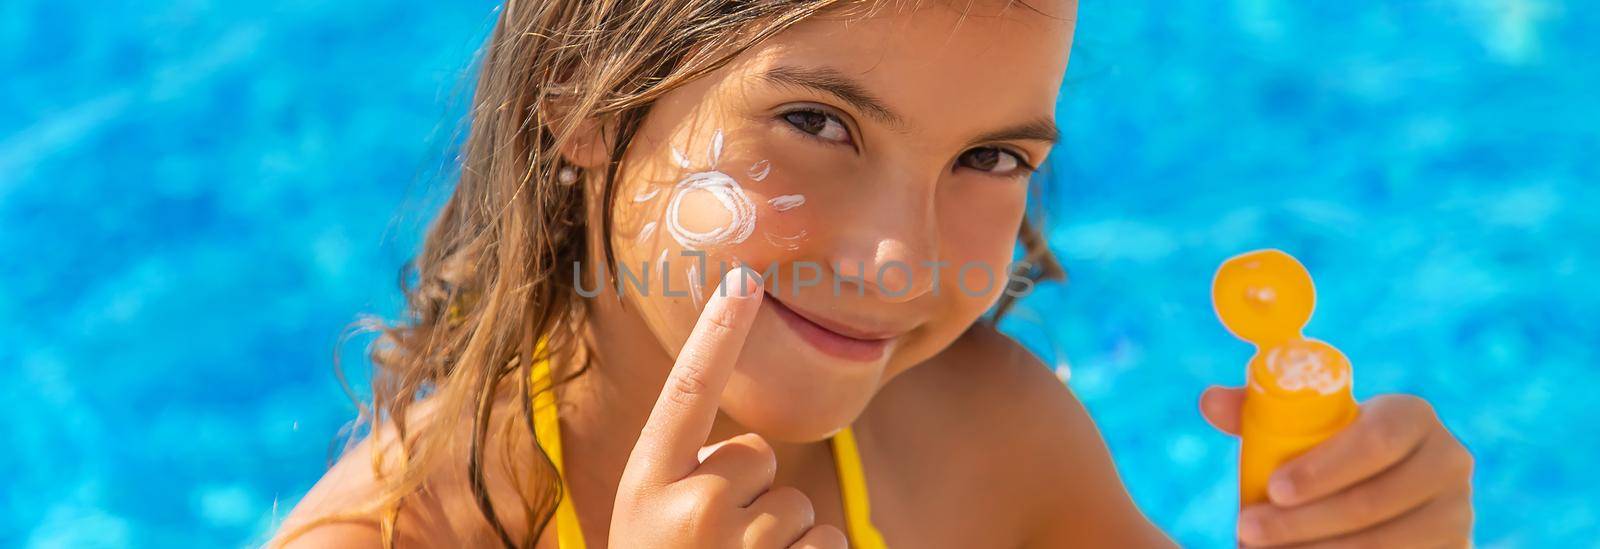 The child is putting sunscreen on her face. Selective focus. Kid.